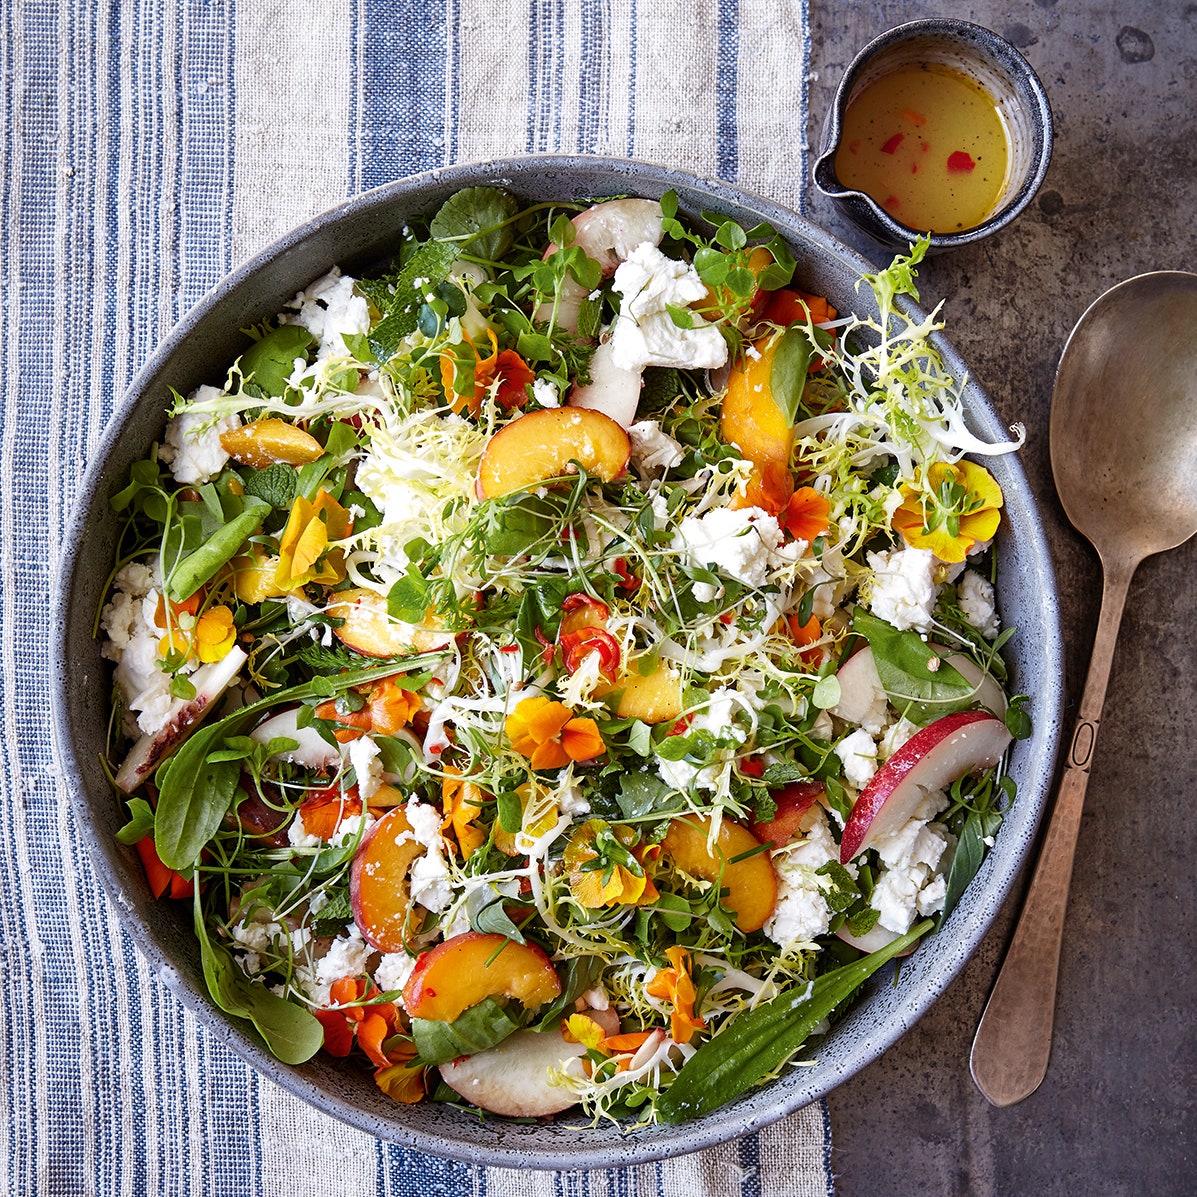 Lime-dressed nectarine, feta and chive salad